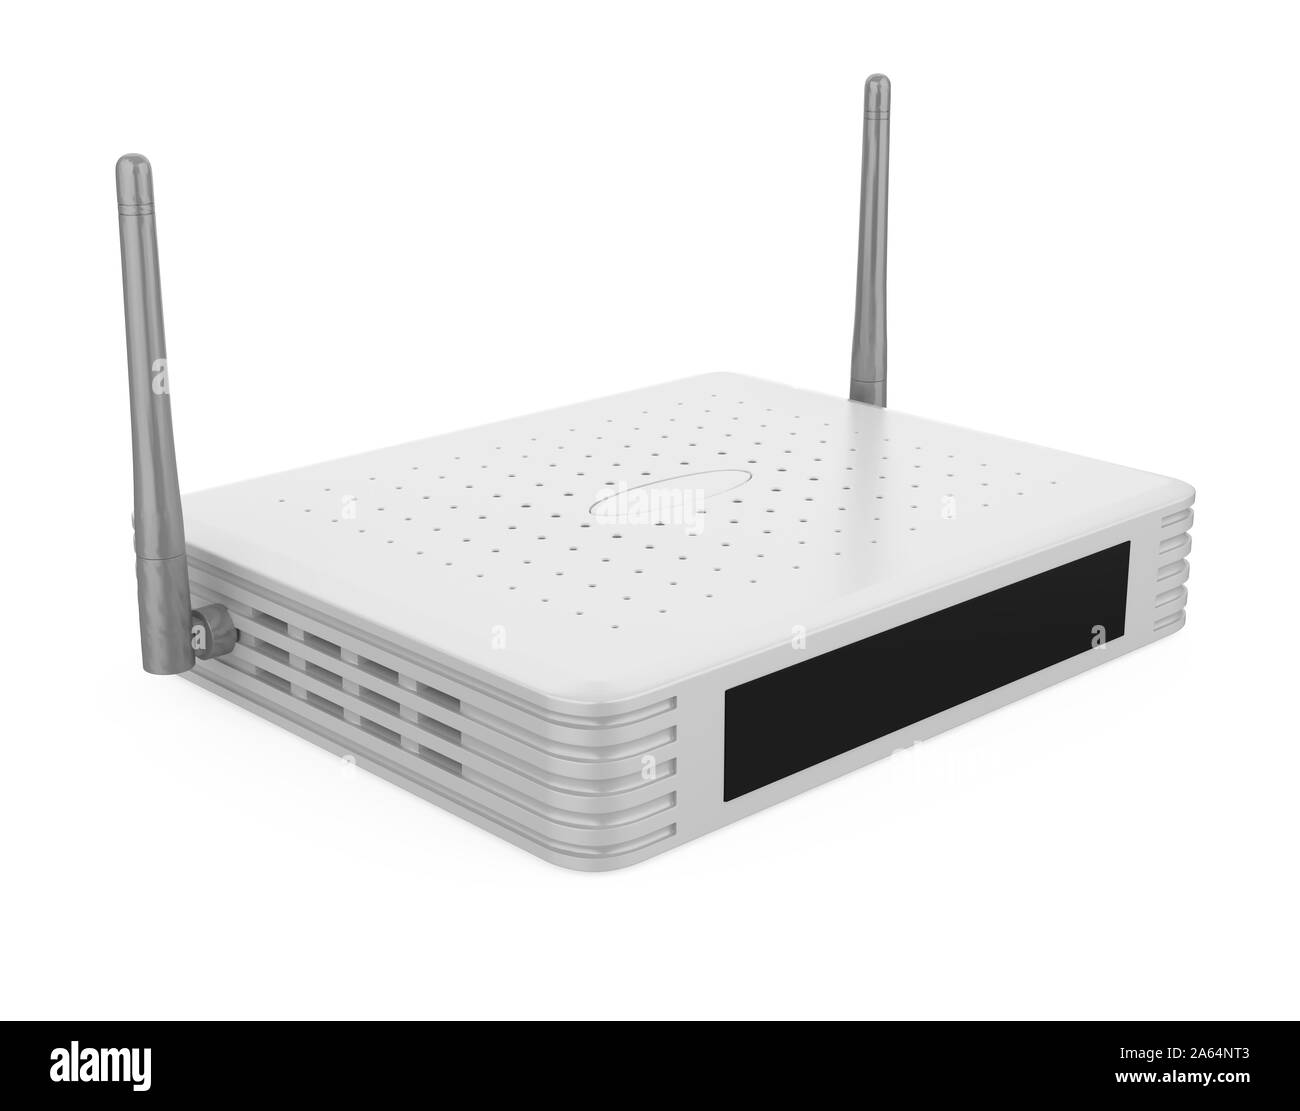 Wifi router Black and White Stock Photos & Images - Alamy